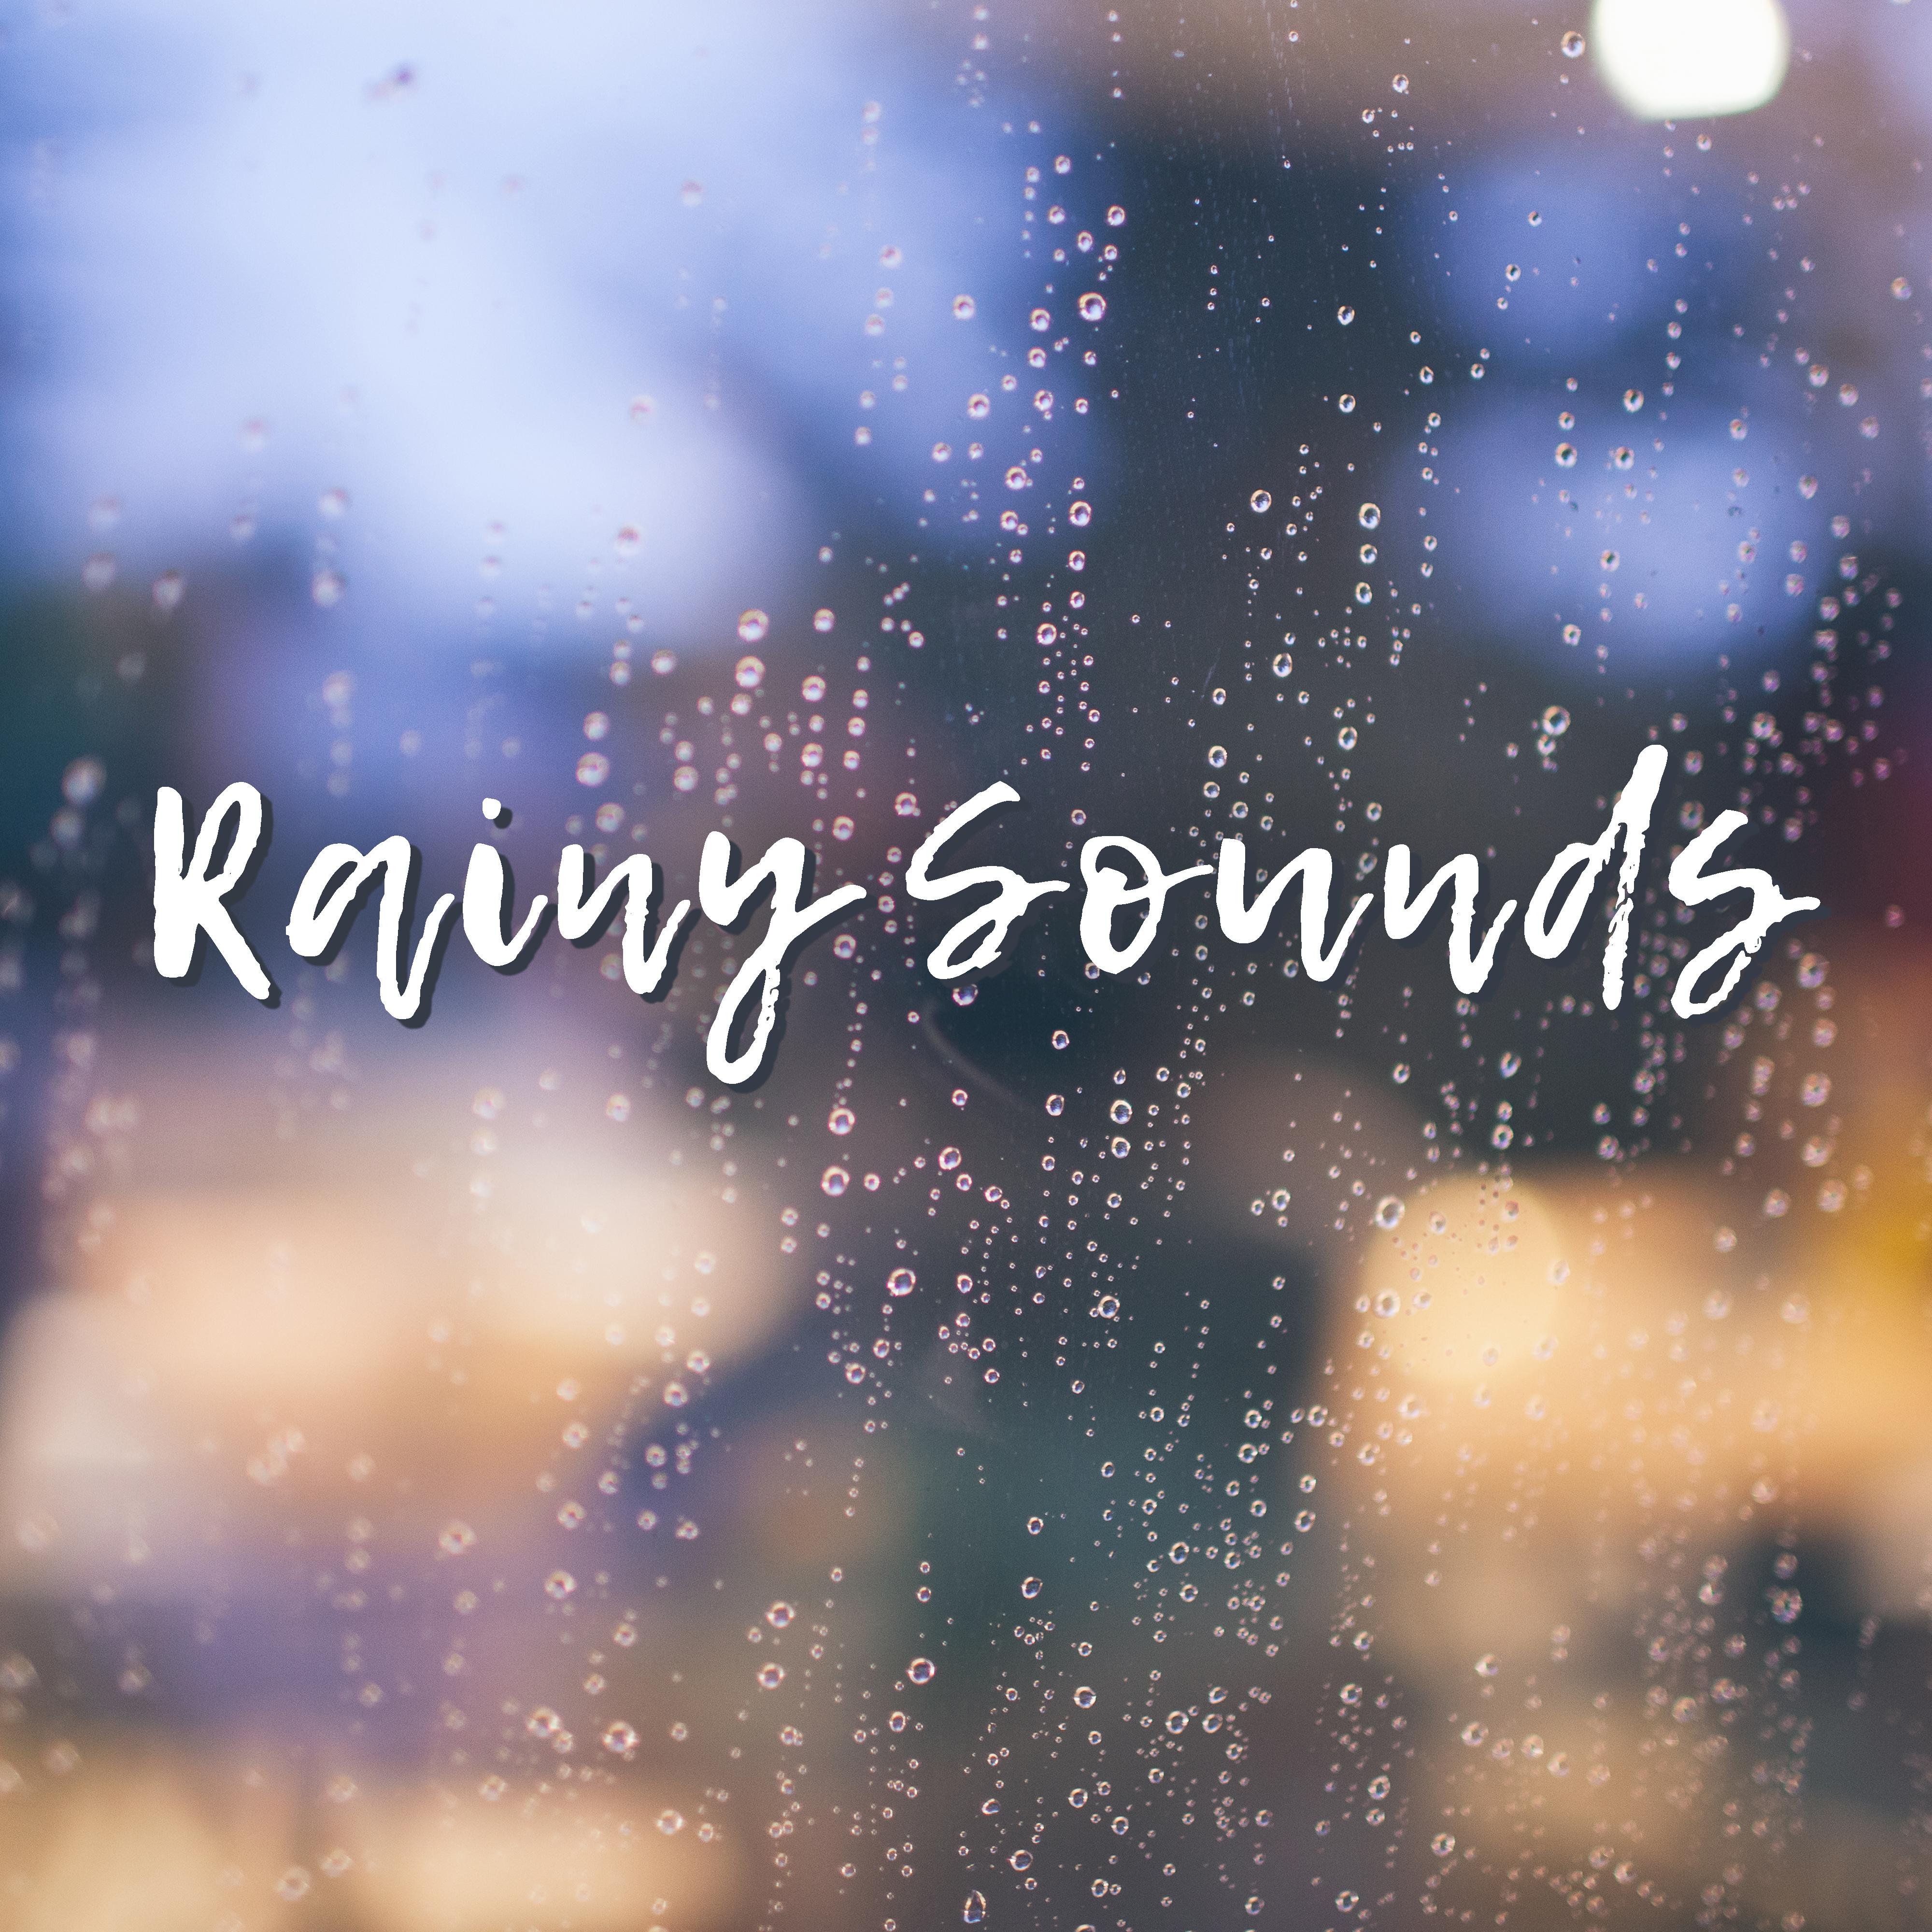 Rainy Sounds  Pure Relaxation, Nature Sounds, Anti  Stress Music Therapy, Zen, Healing Bliss